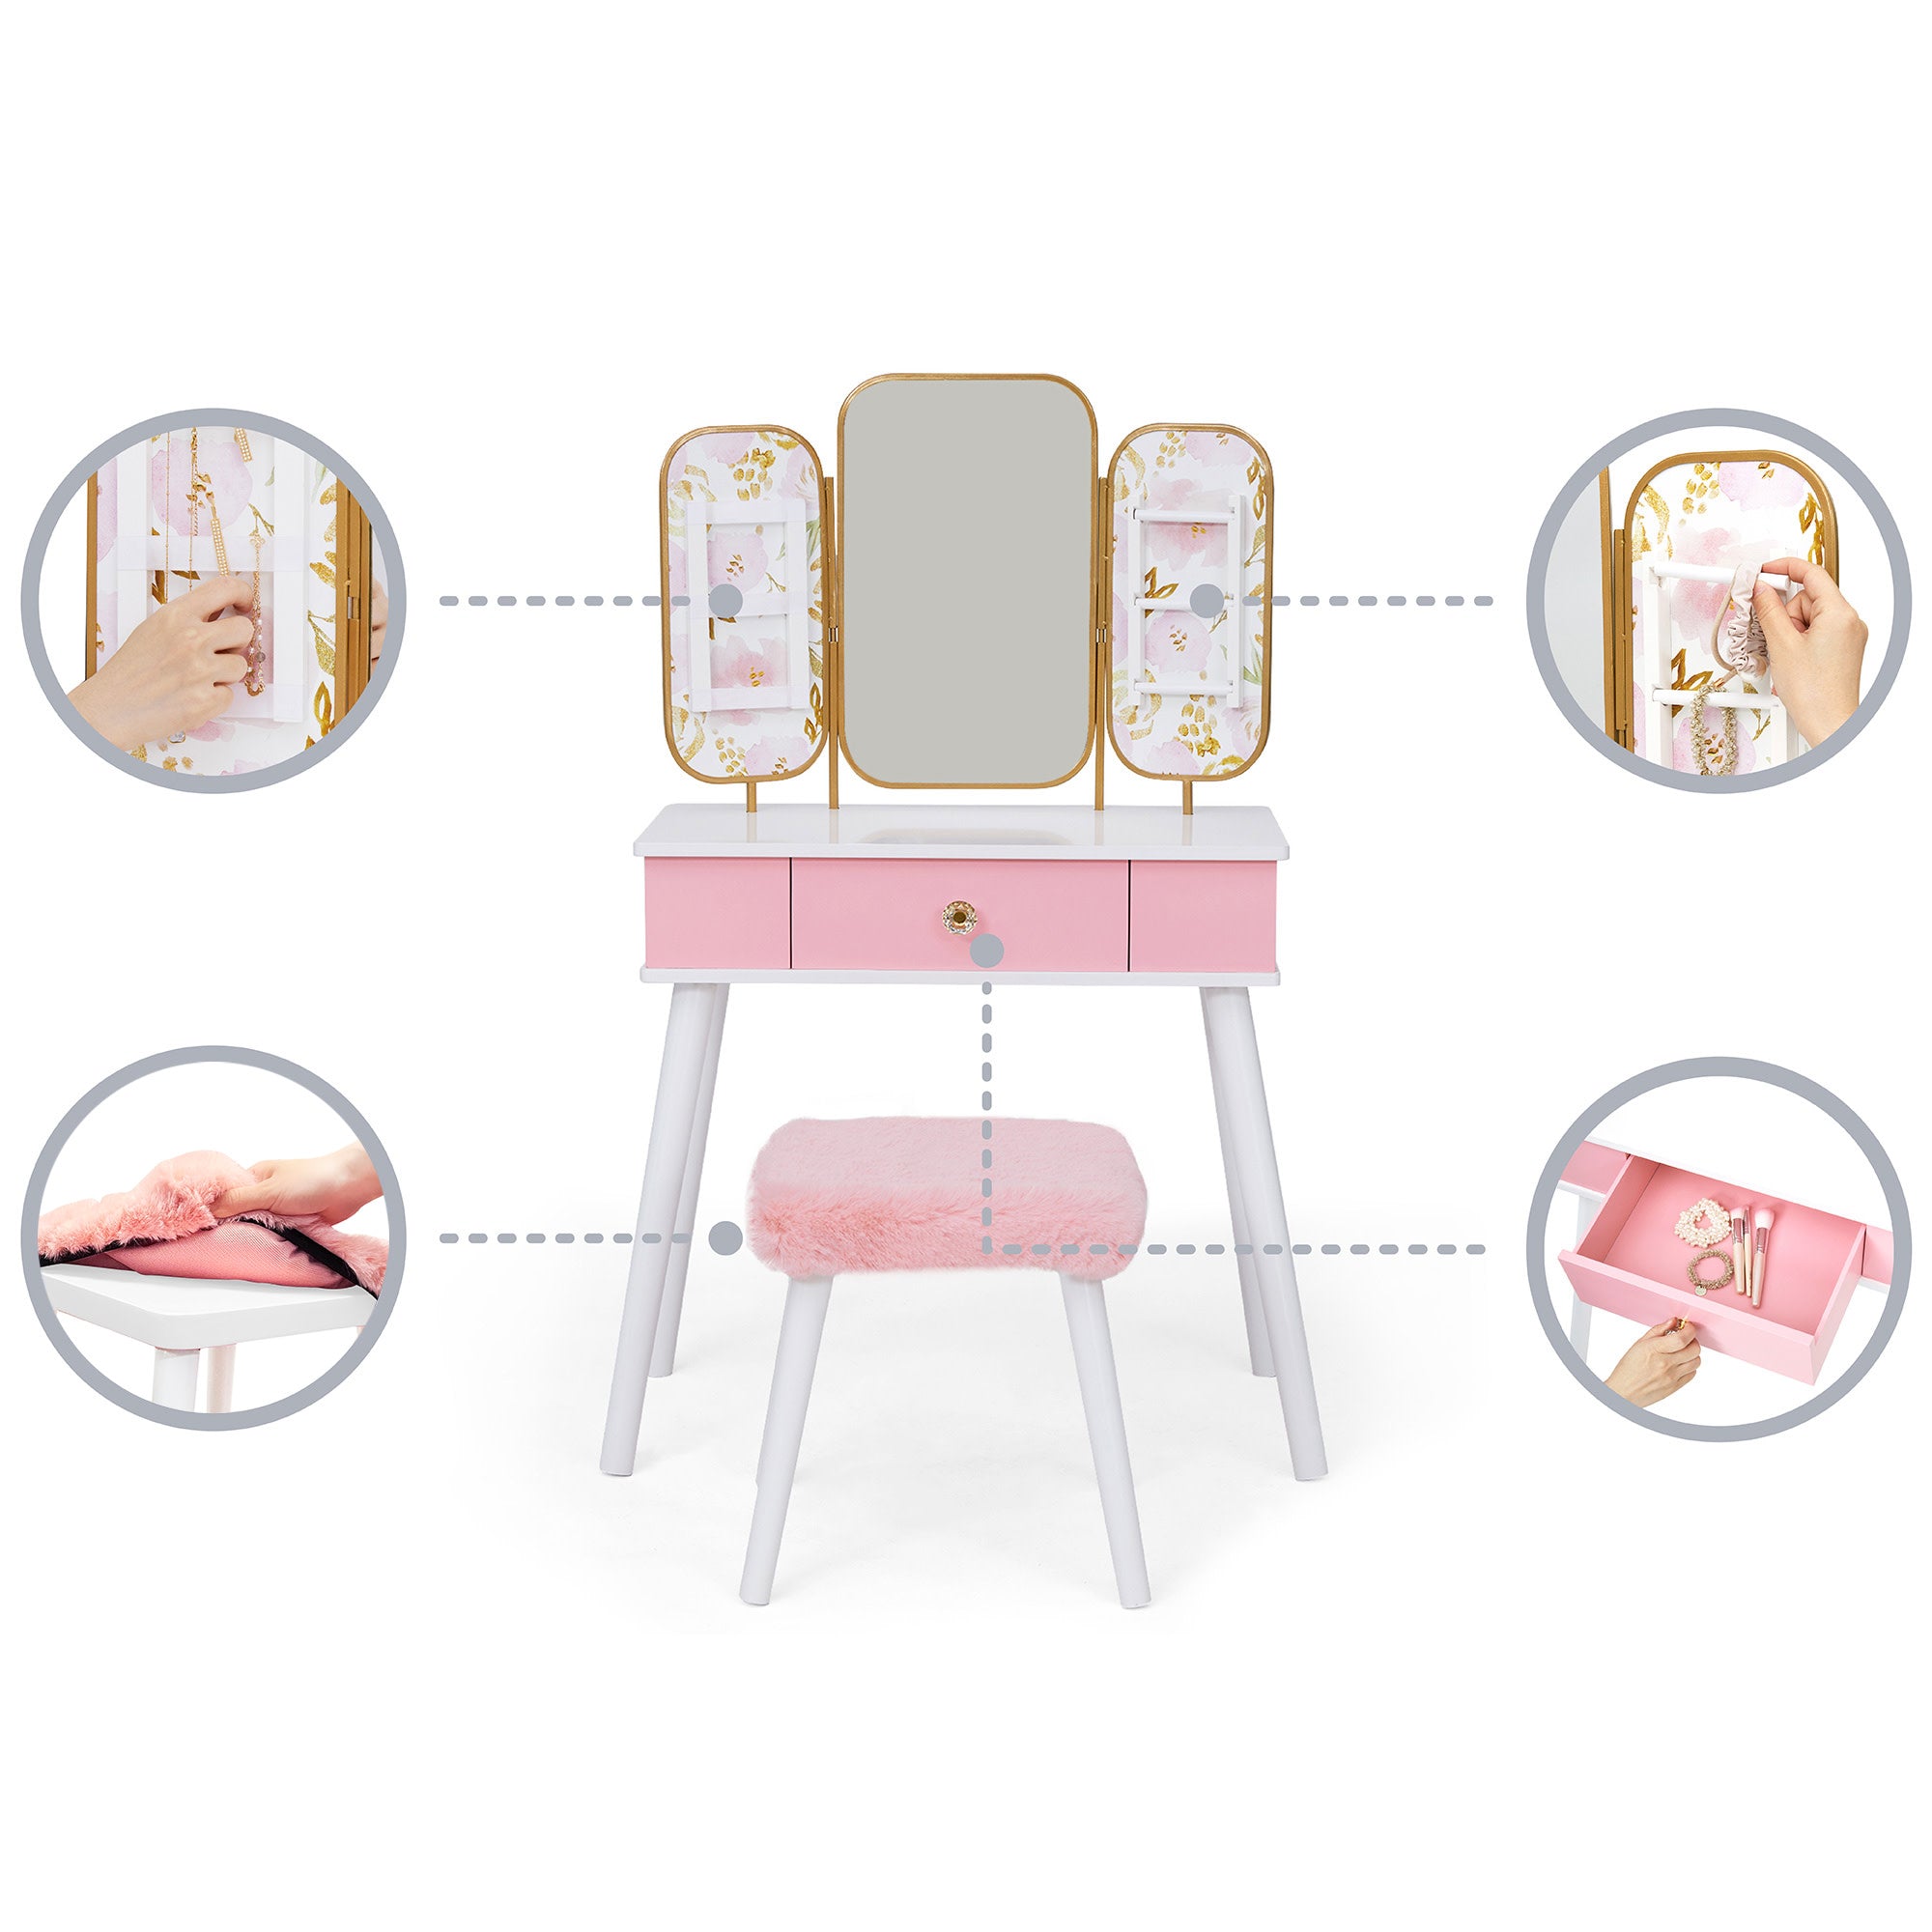 Fantasy Fields Kids Little Lady Izabel Floral Vanity with Mirror, Storage and Stool, Pink